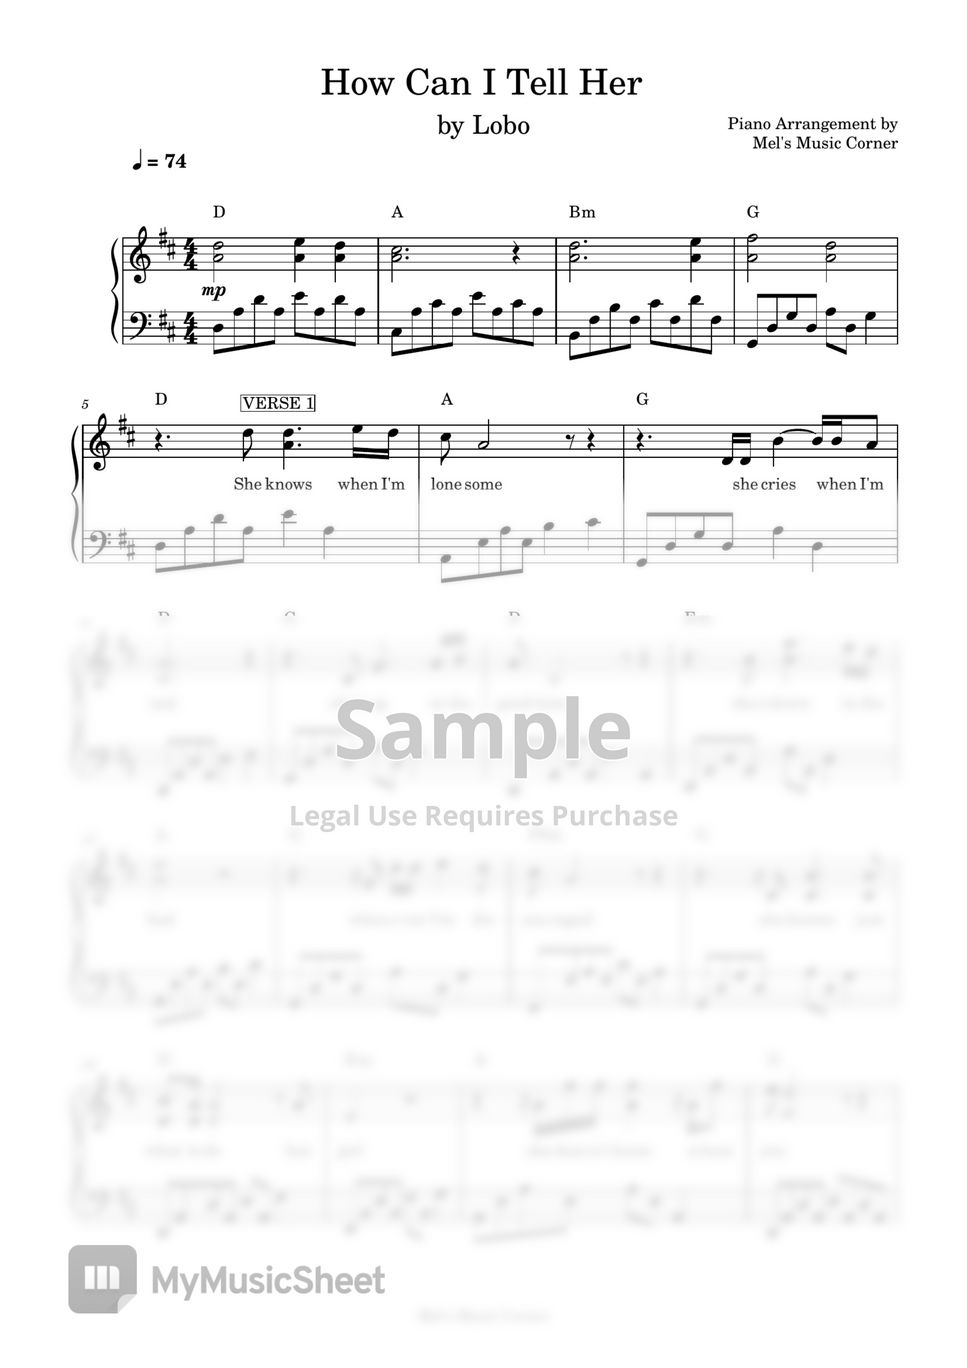 Lobo How Can I Tell Her Piano Sheet Music Sheets By Mels Music Corner 